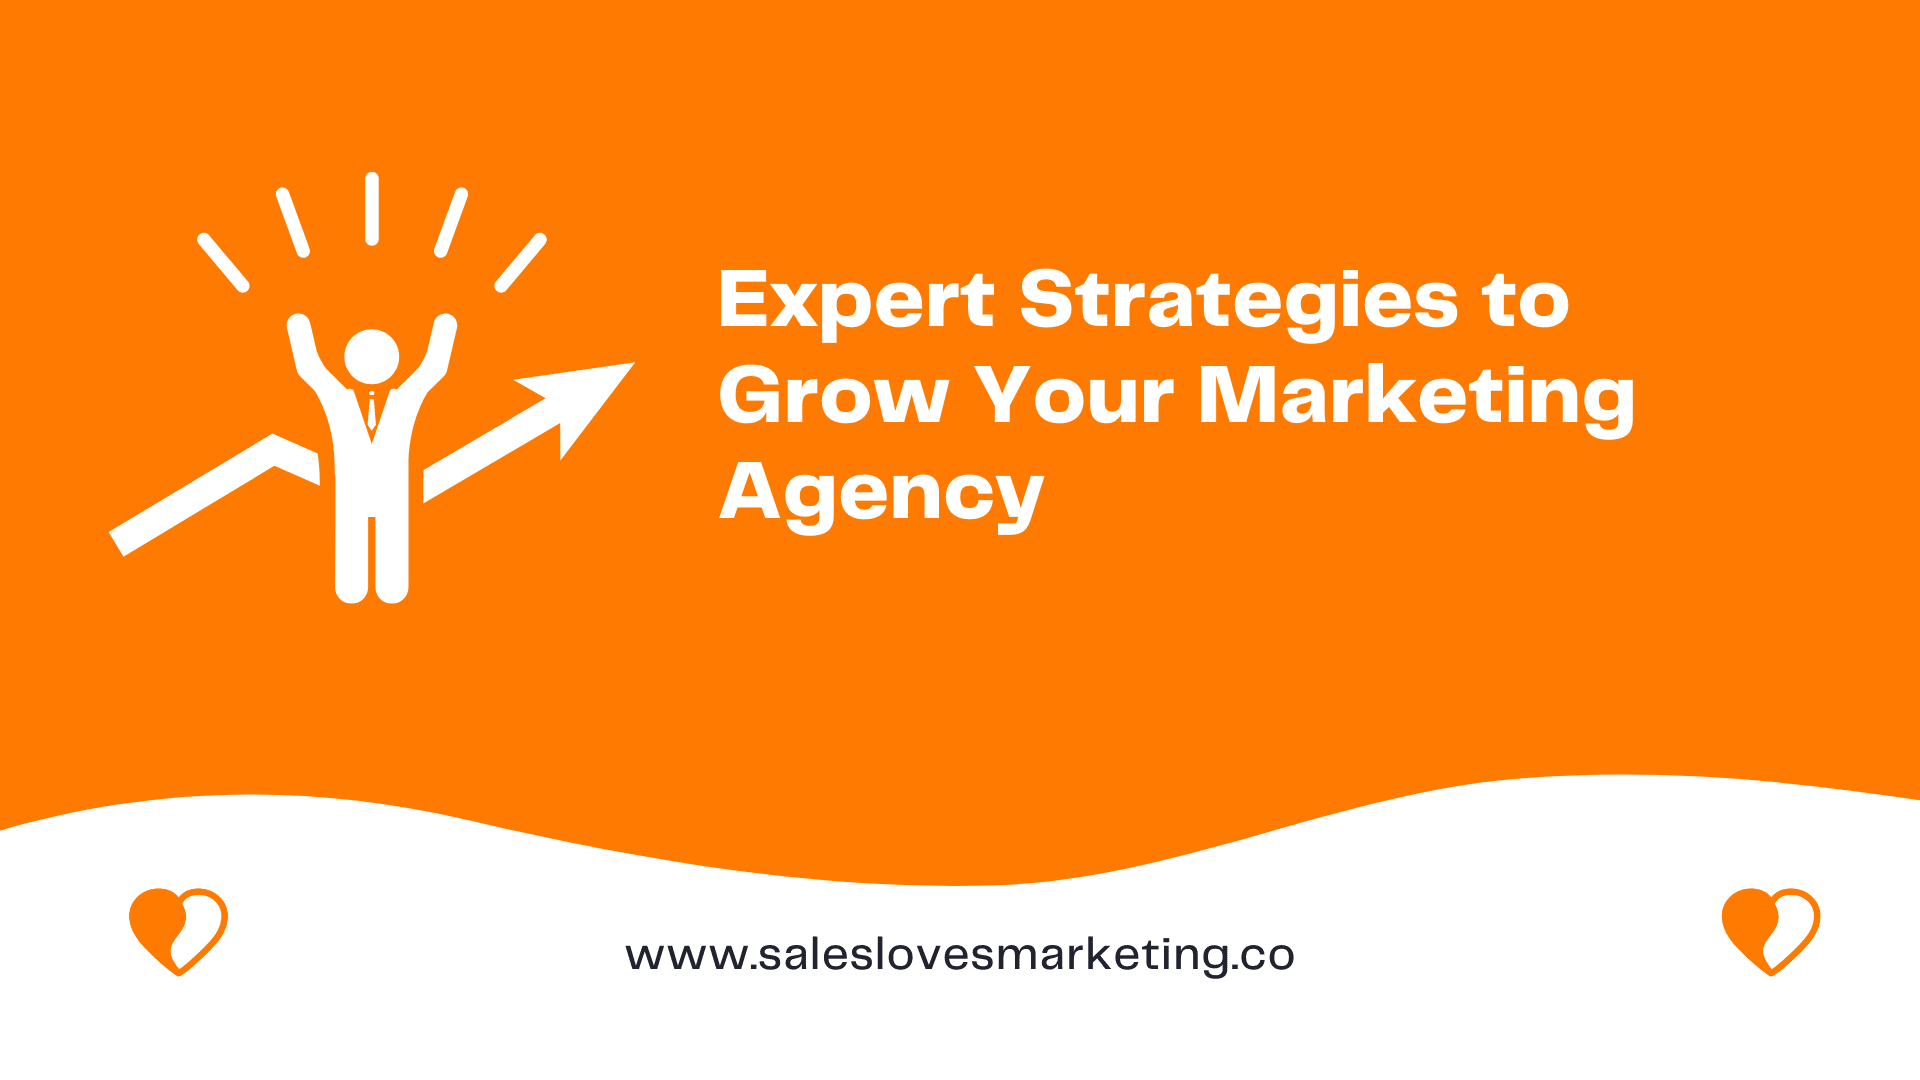 Expert Strategies to Grow Your Marketing Agency